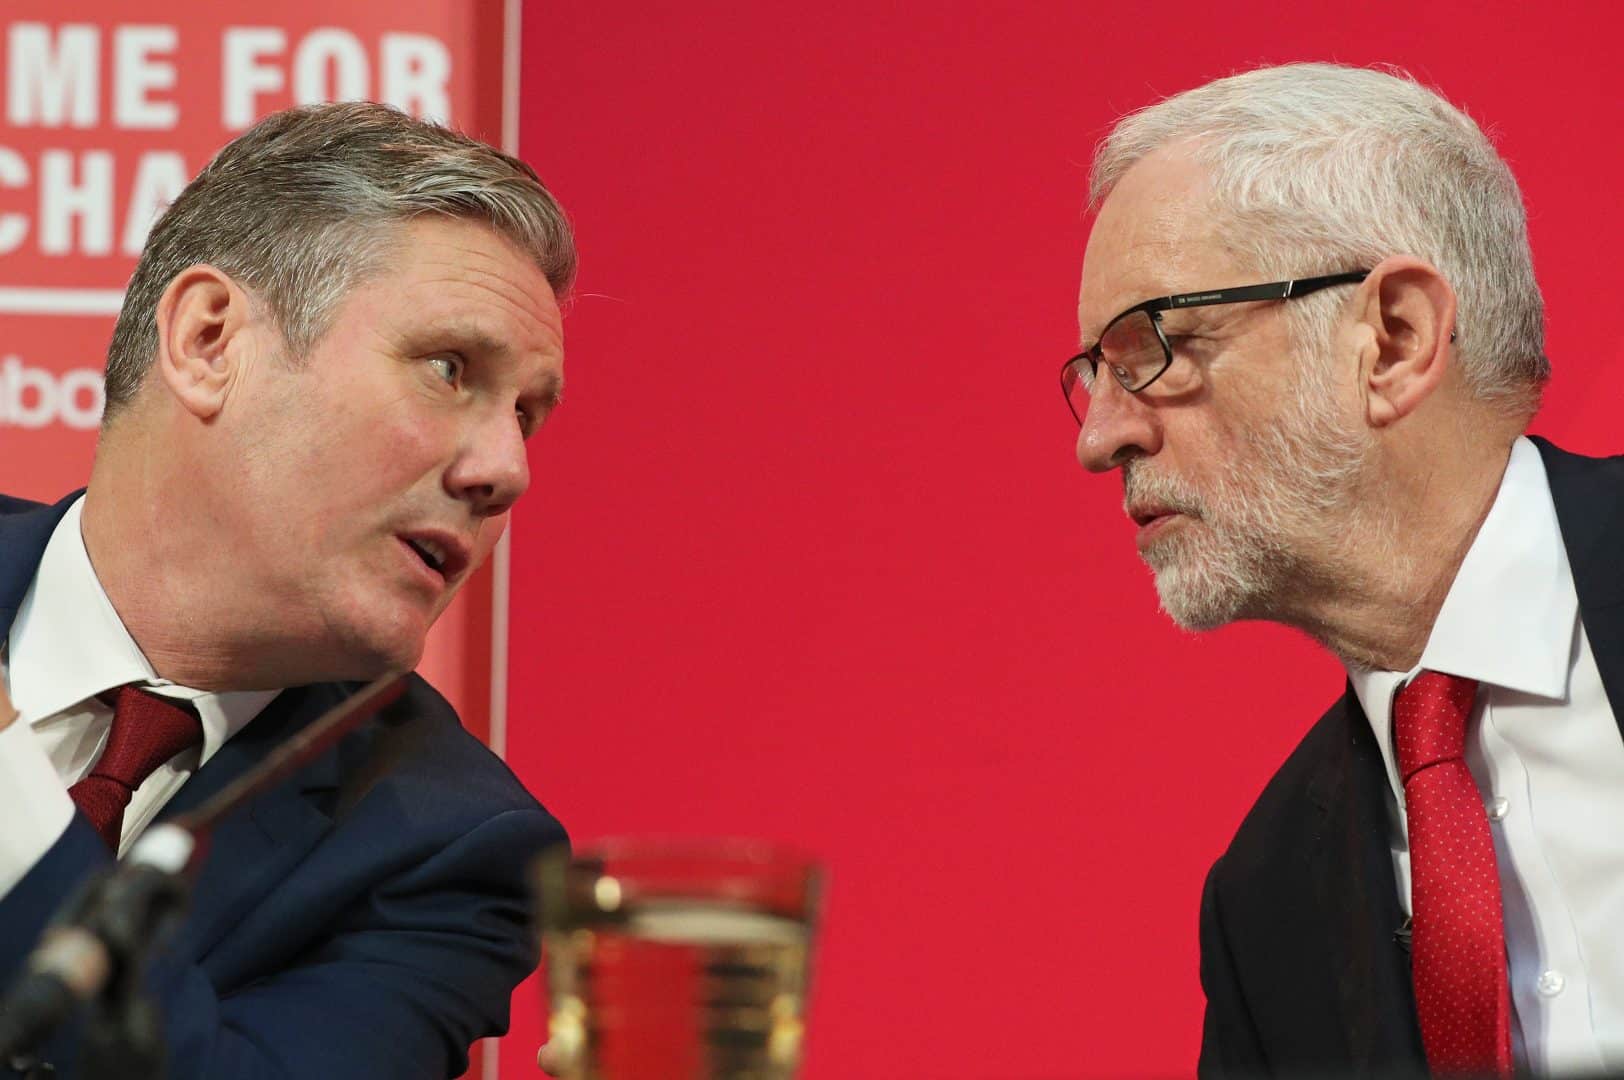 Sir Keir Starmer promises to tackle anti-Semitism in the Labour Party